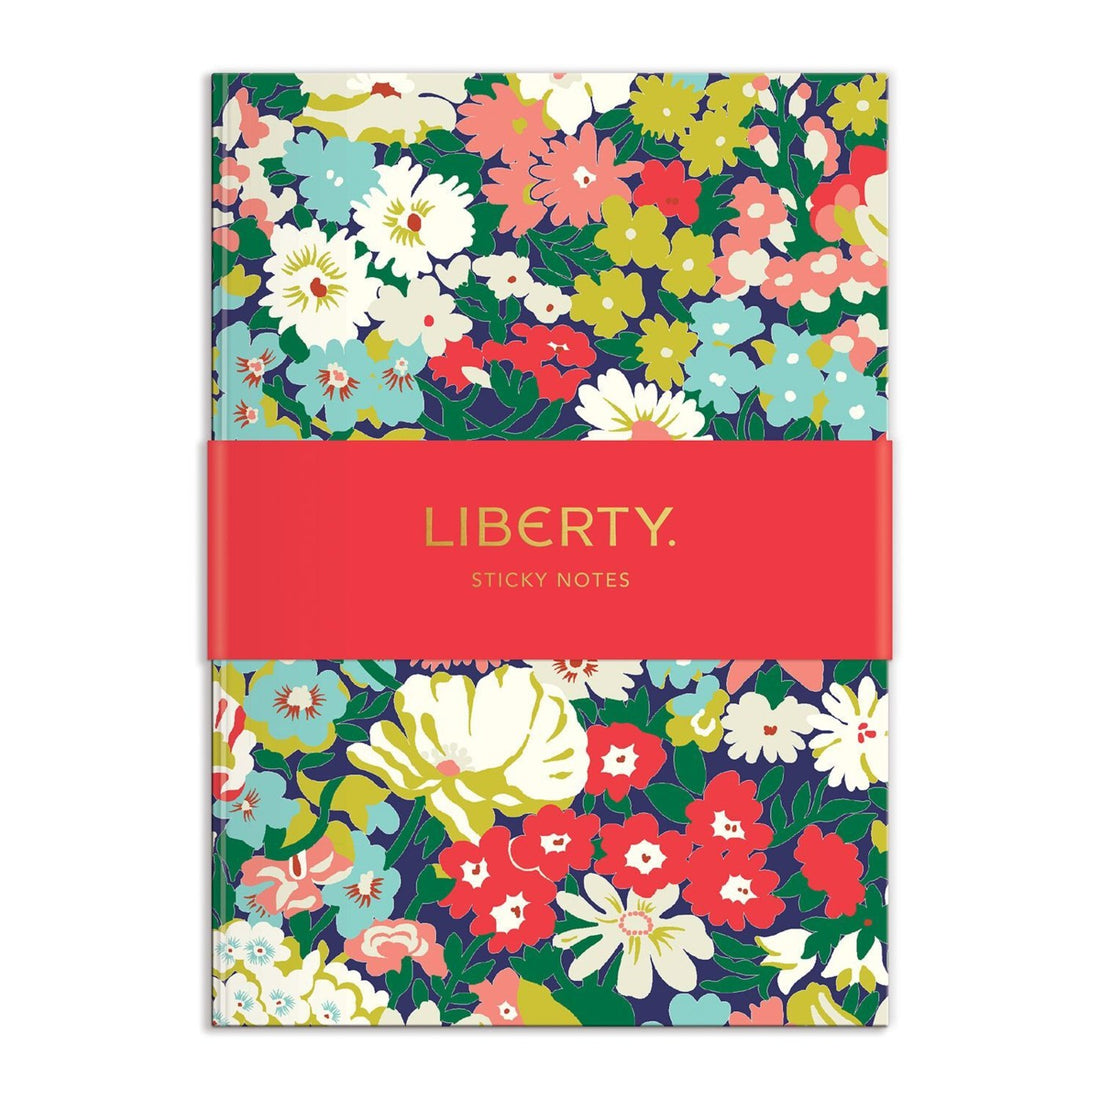 A Liberty Sticky Notes Hardcover Book with a floral pattern and the word Liberty London from Chronicle Books.